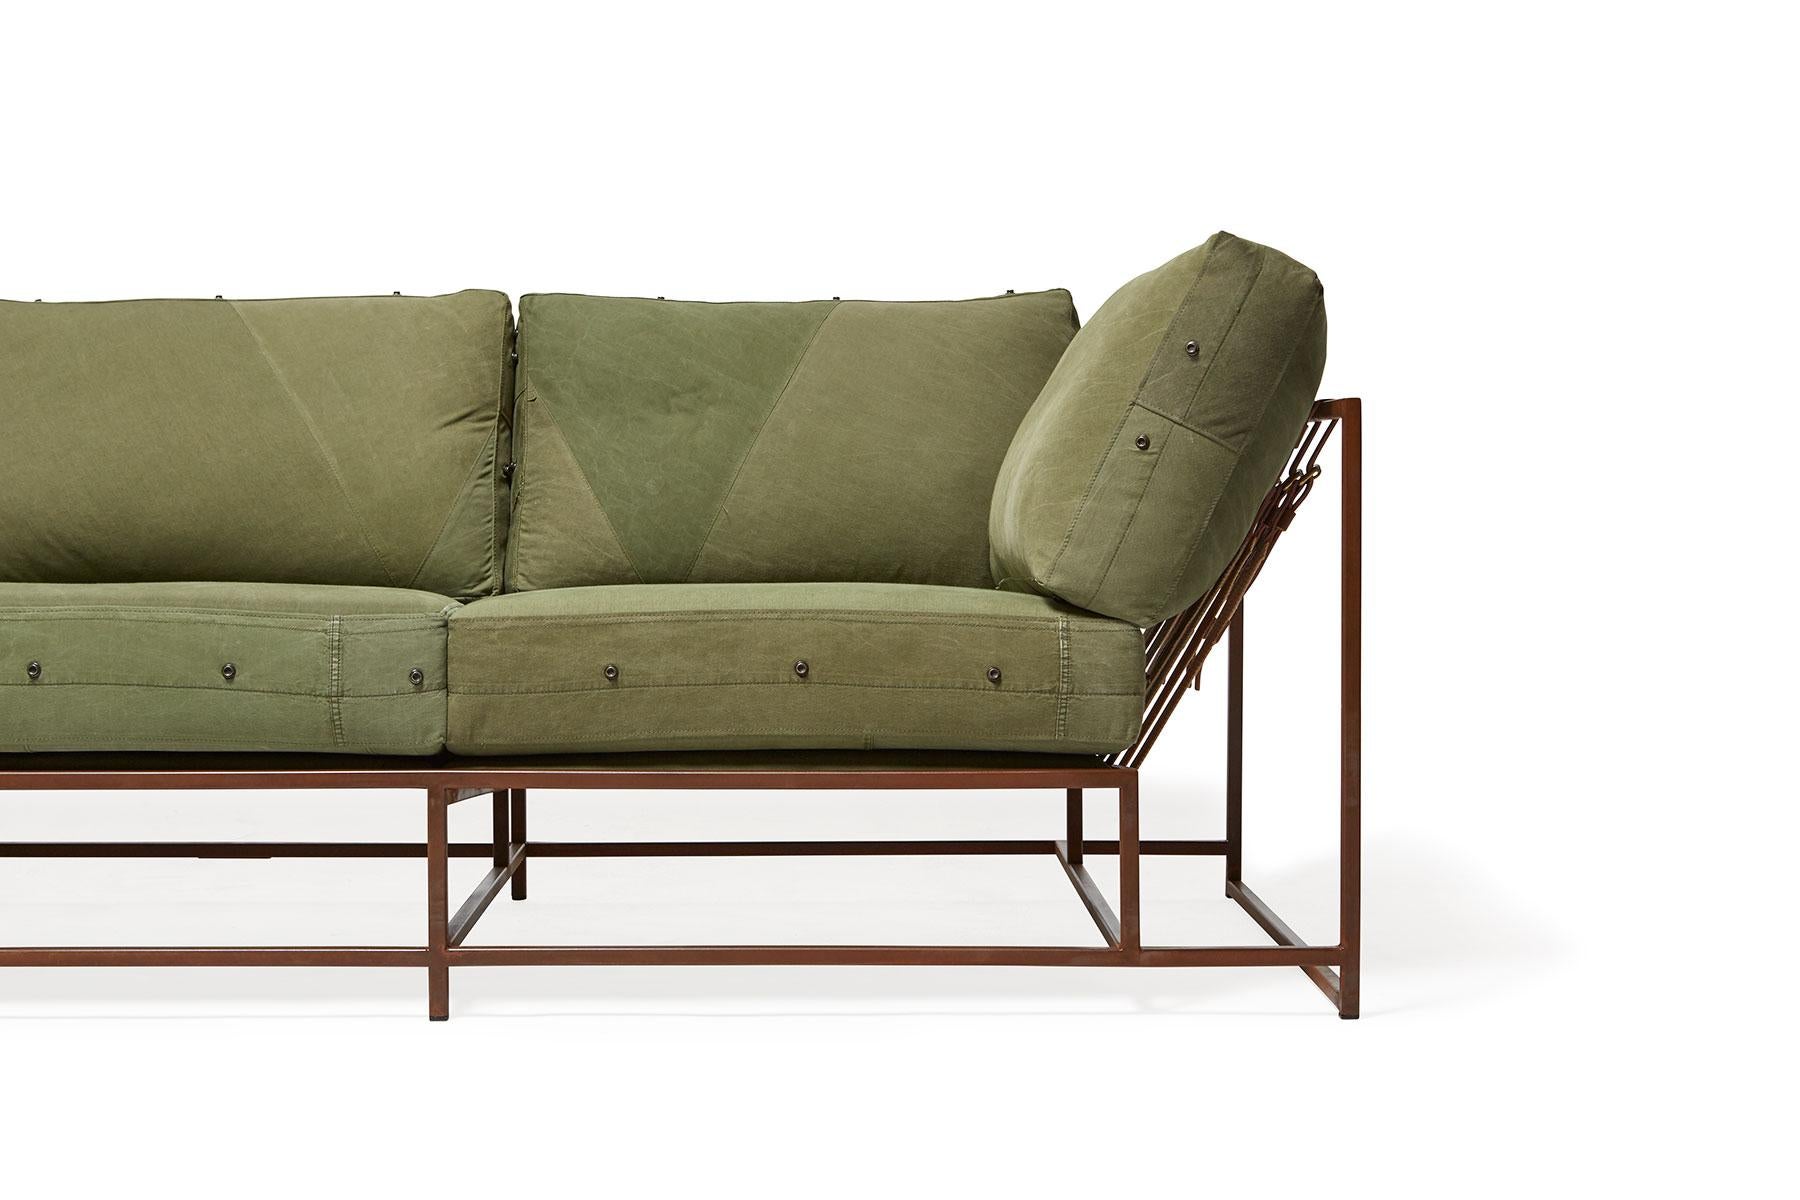 Conceived in 2011, this sofa design was the first piece in The Inheritance Collection by Stephen Kenn. Beginning from a place of curiosity about how furniture was constructed, the collection is a result of reimagining typical upholstered